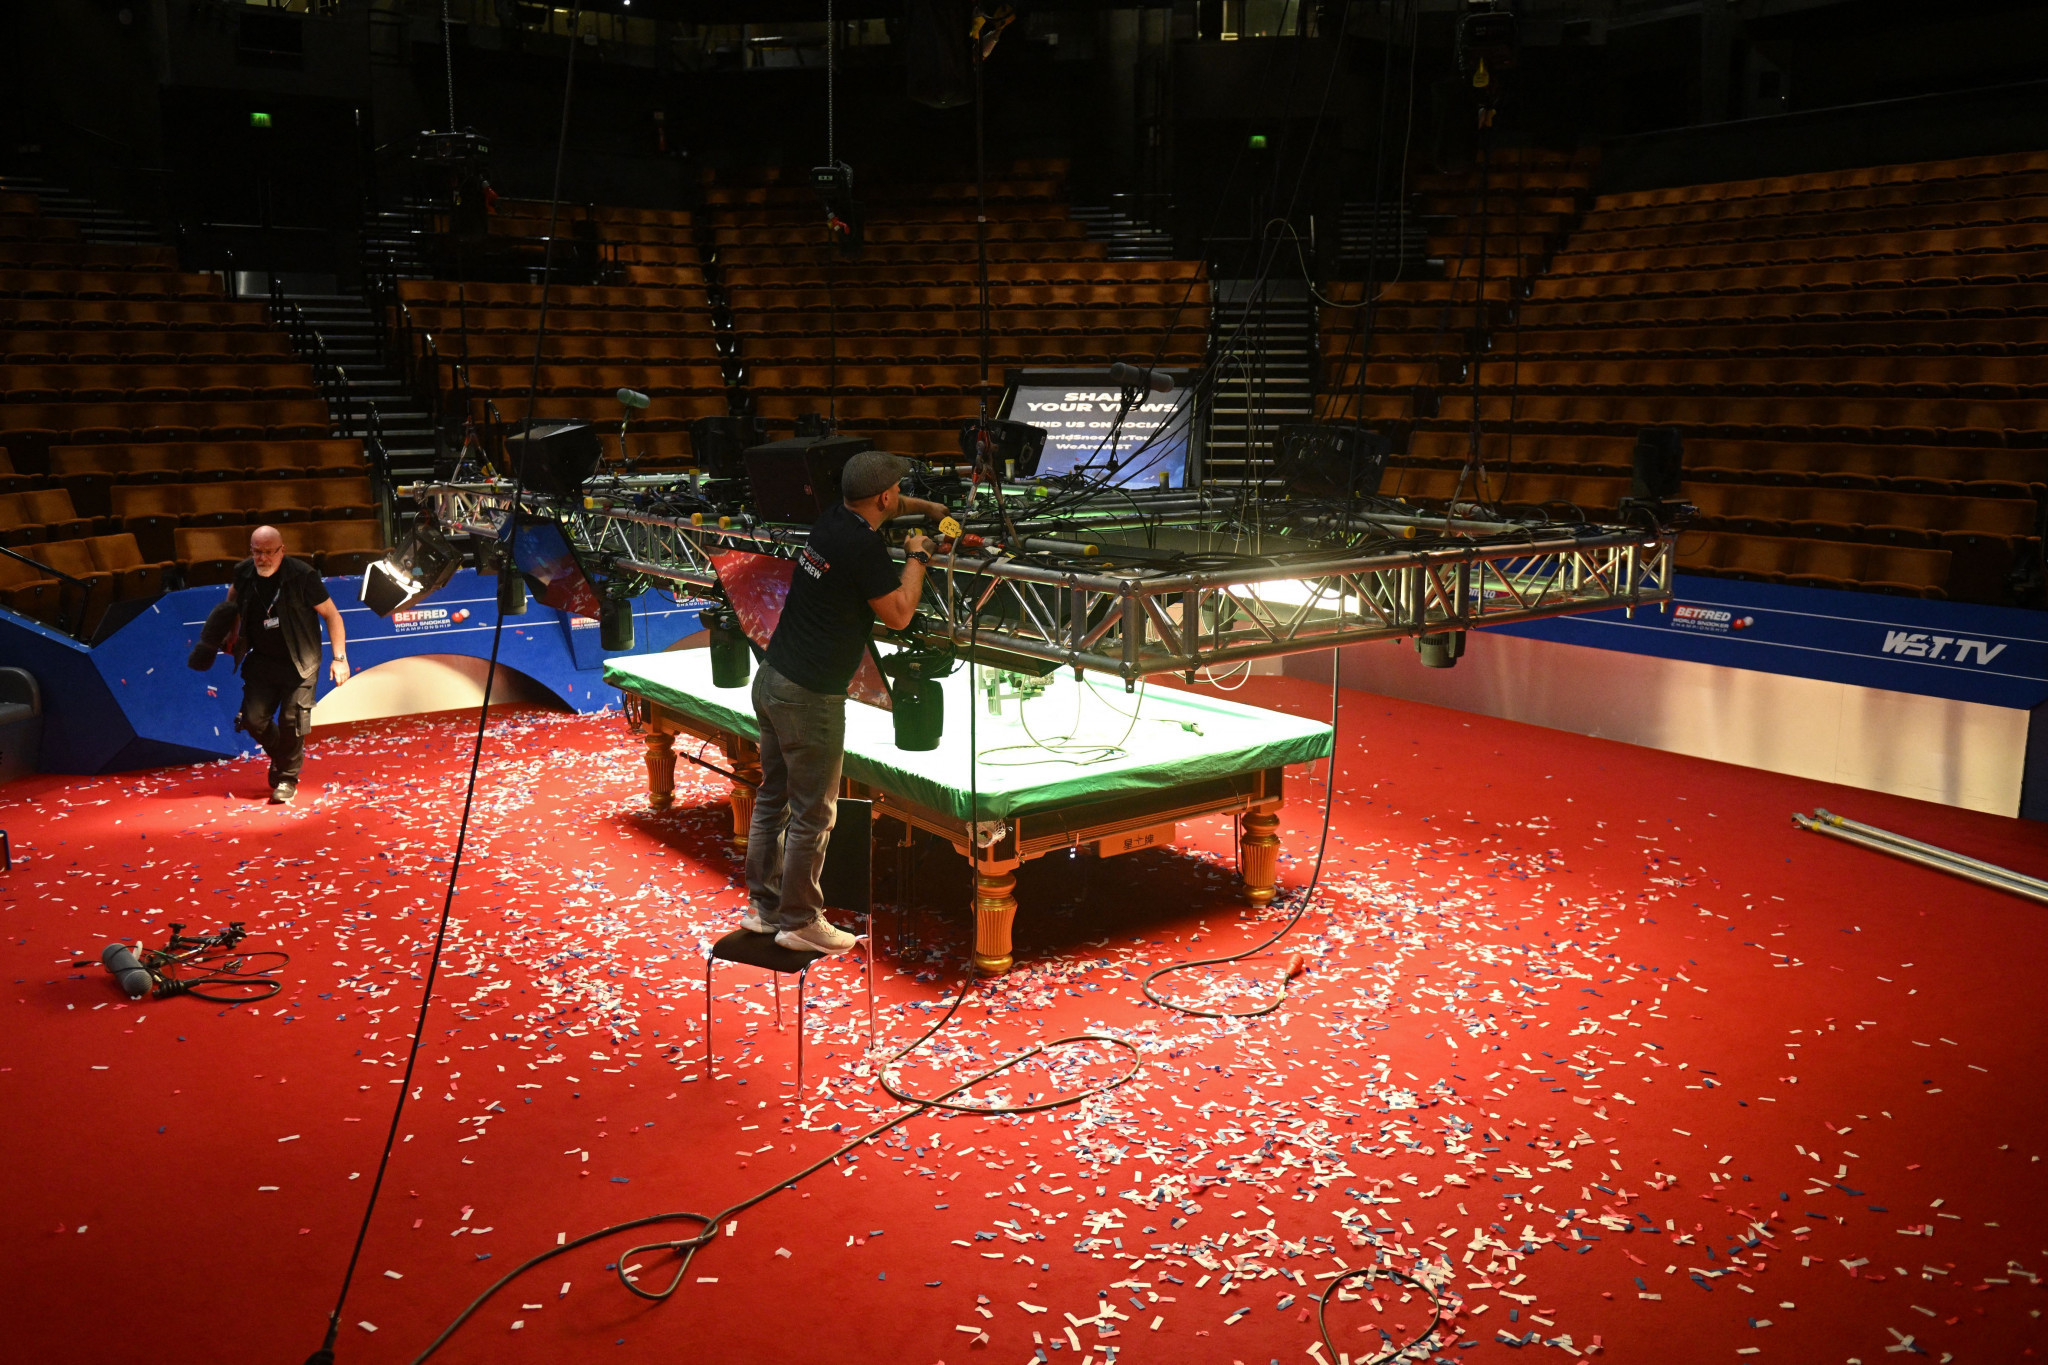 Play delayed at World Snooker Championship after protest by members of Just Stop Oil